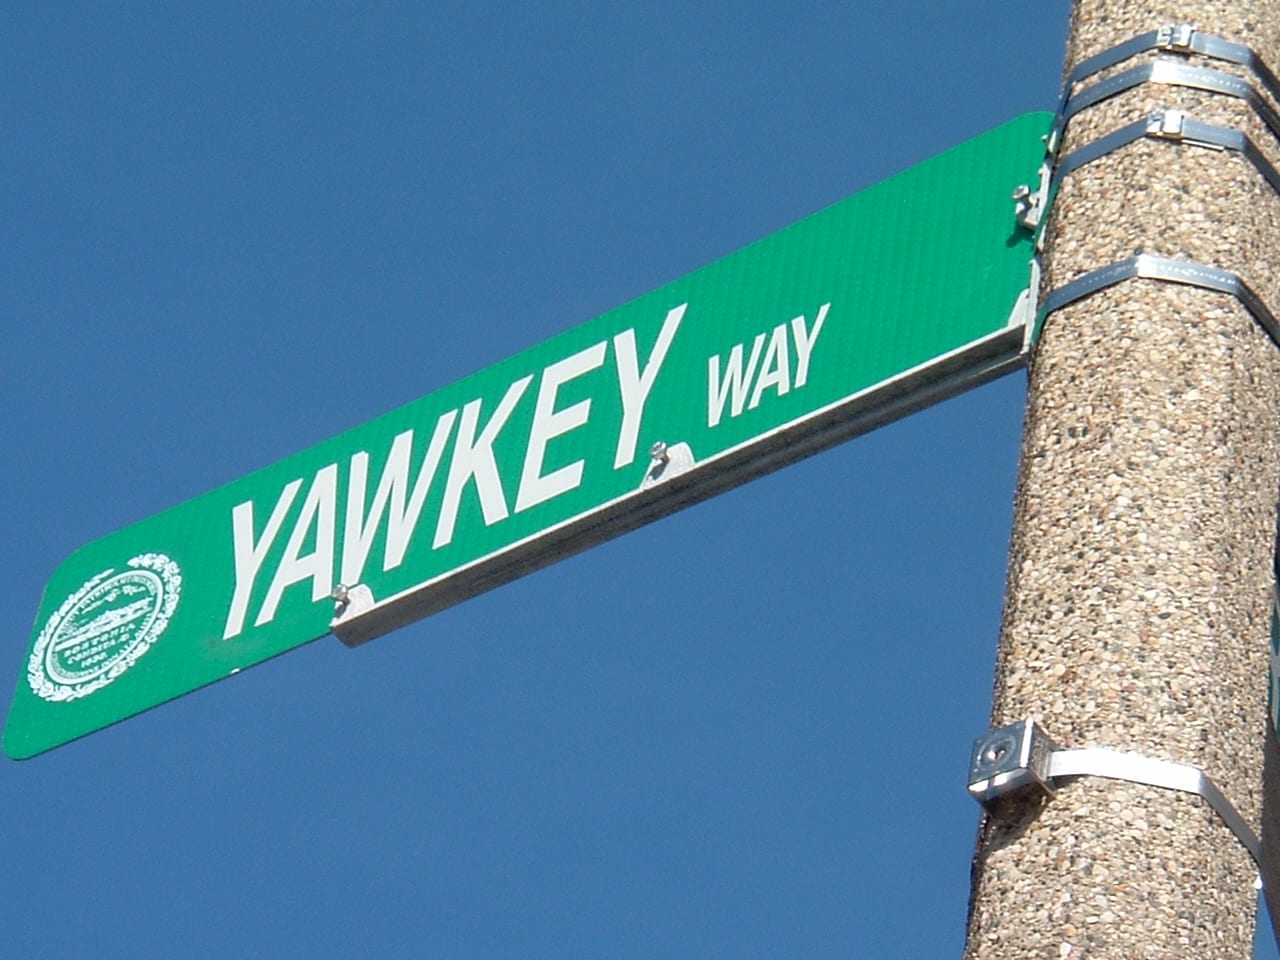 Yawkey Way Outside Fenway Park Changed Over Racist Past